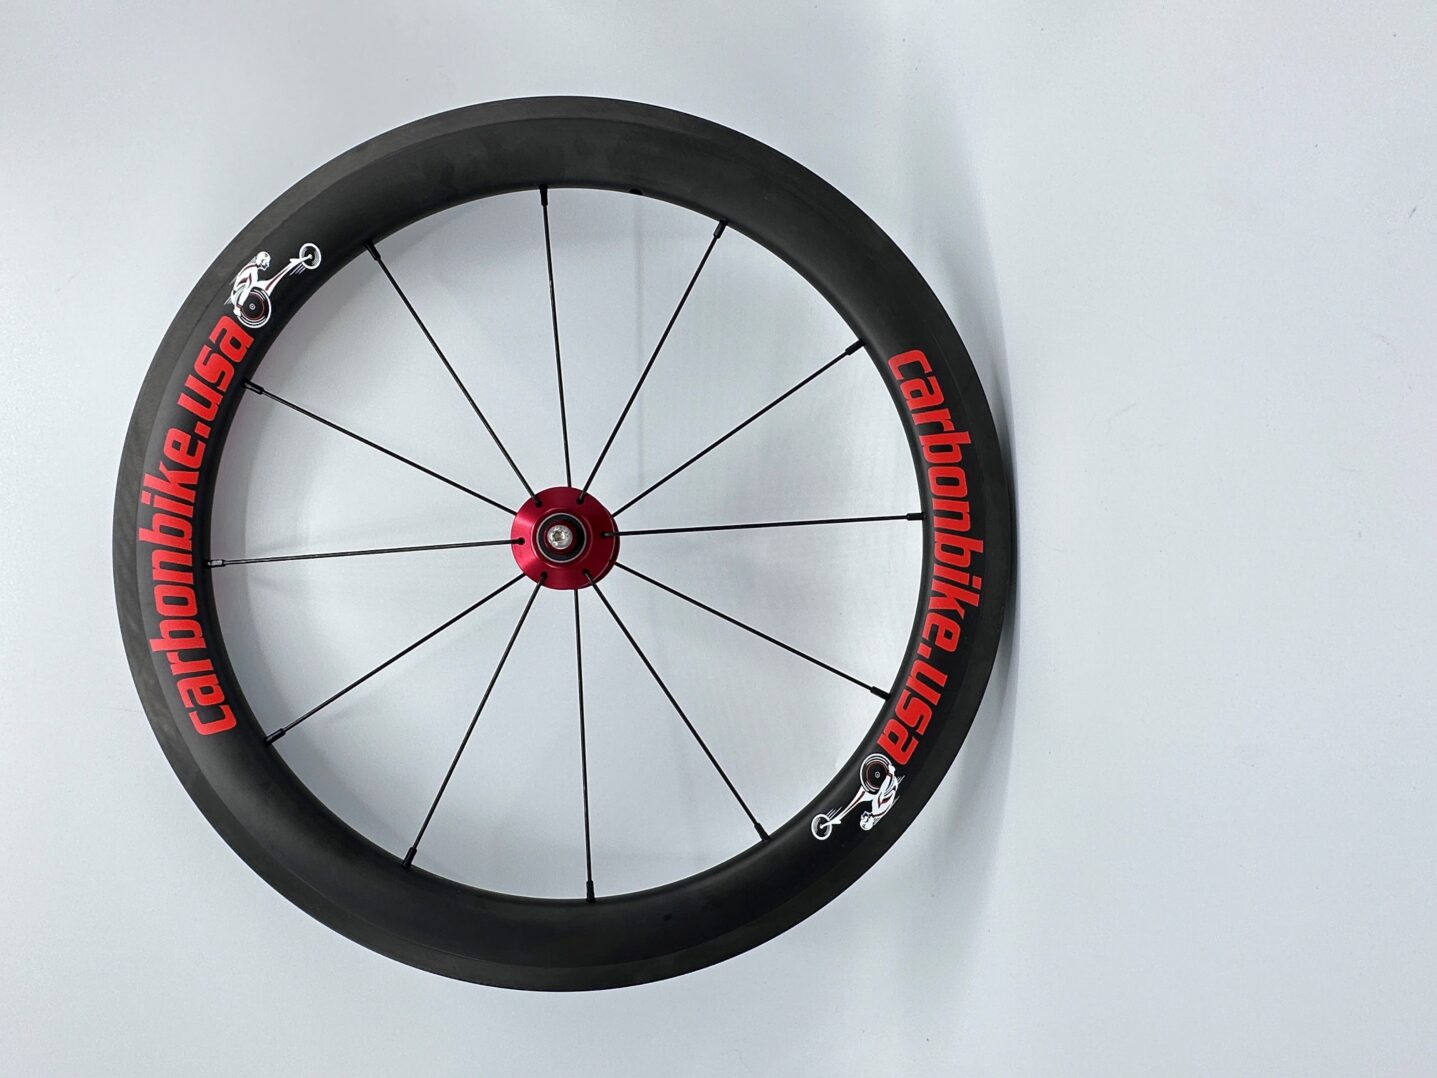 A RW-Carbonbike 20" racing chair wheel with red and black letters on it.